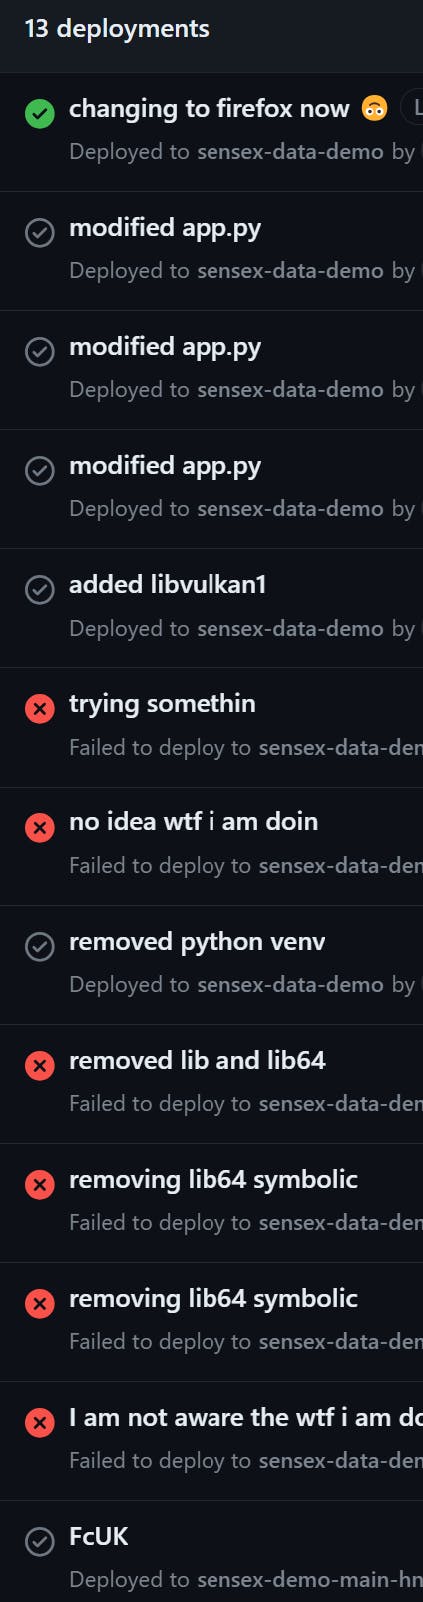 My commit/deployment history